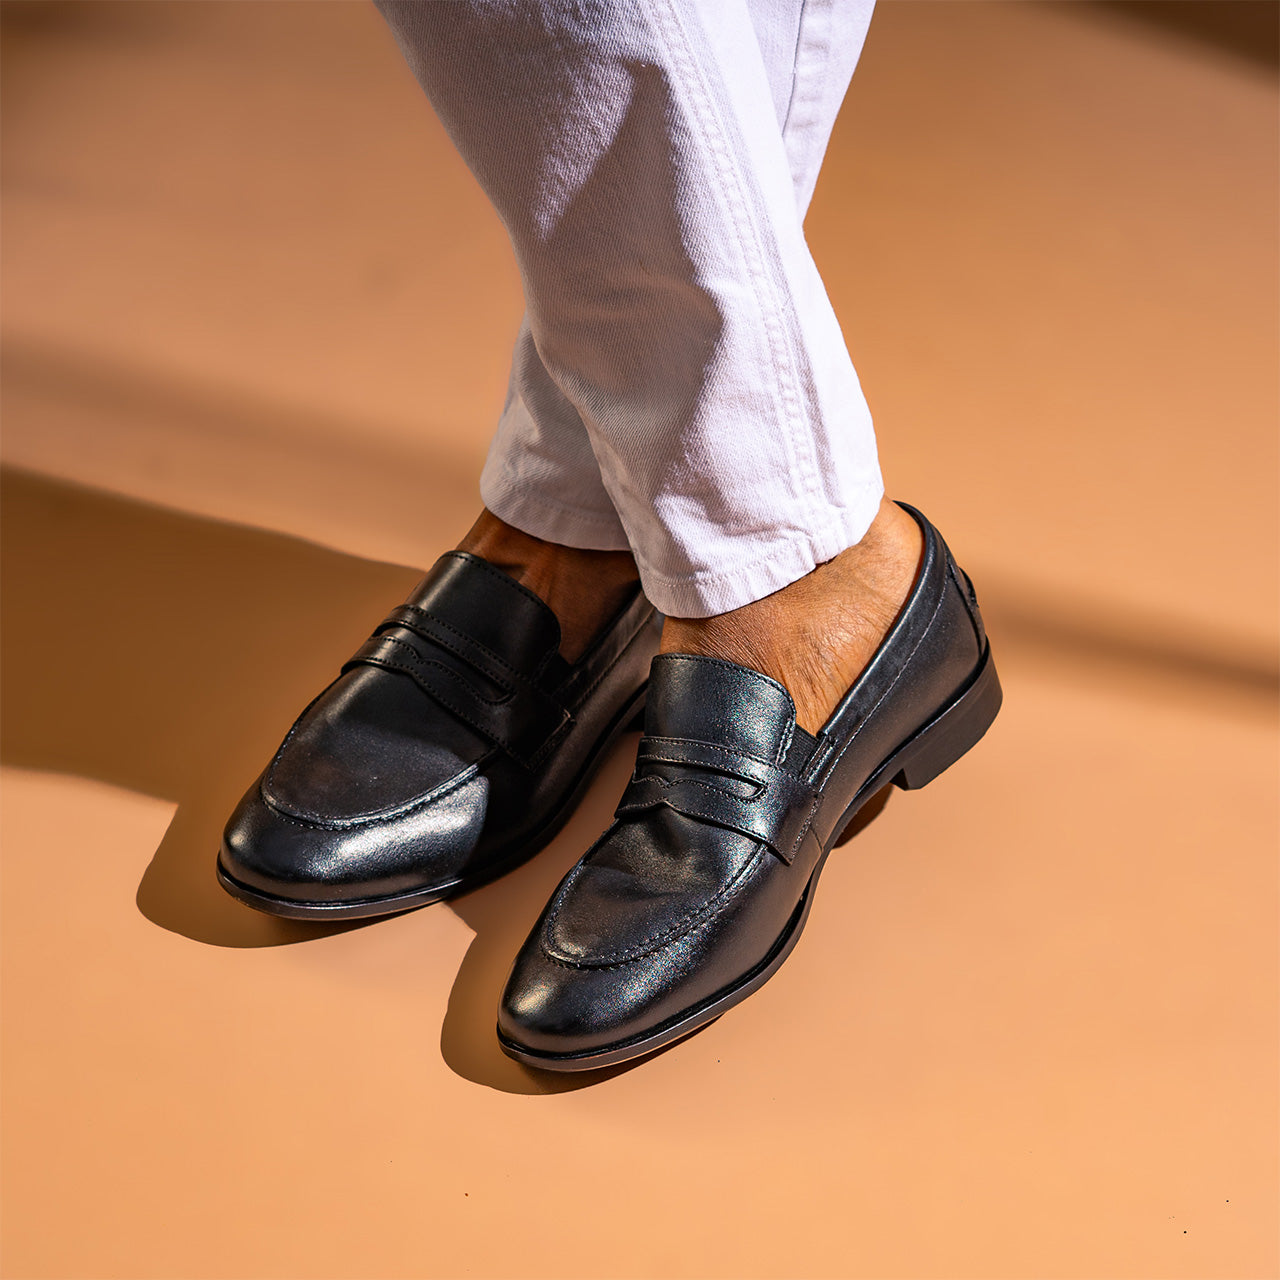 The Aristocrat Formal Shoes